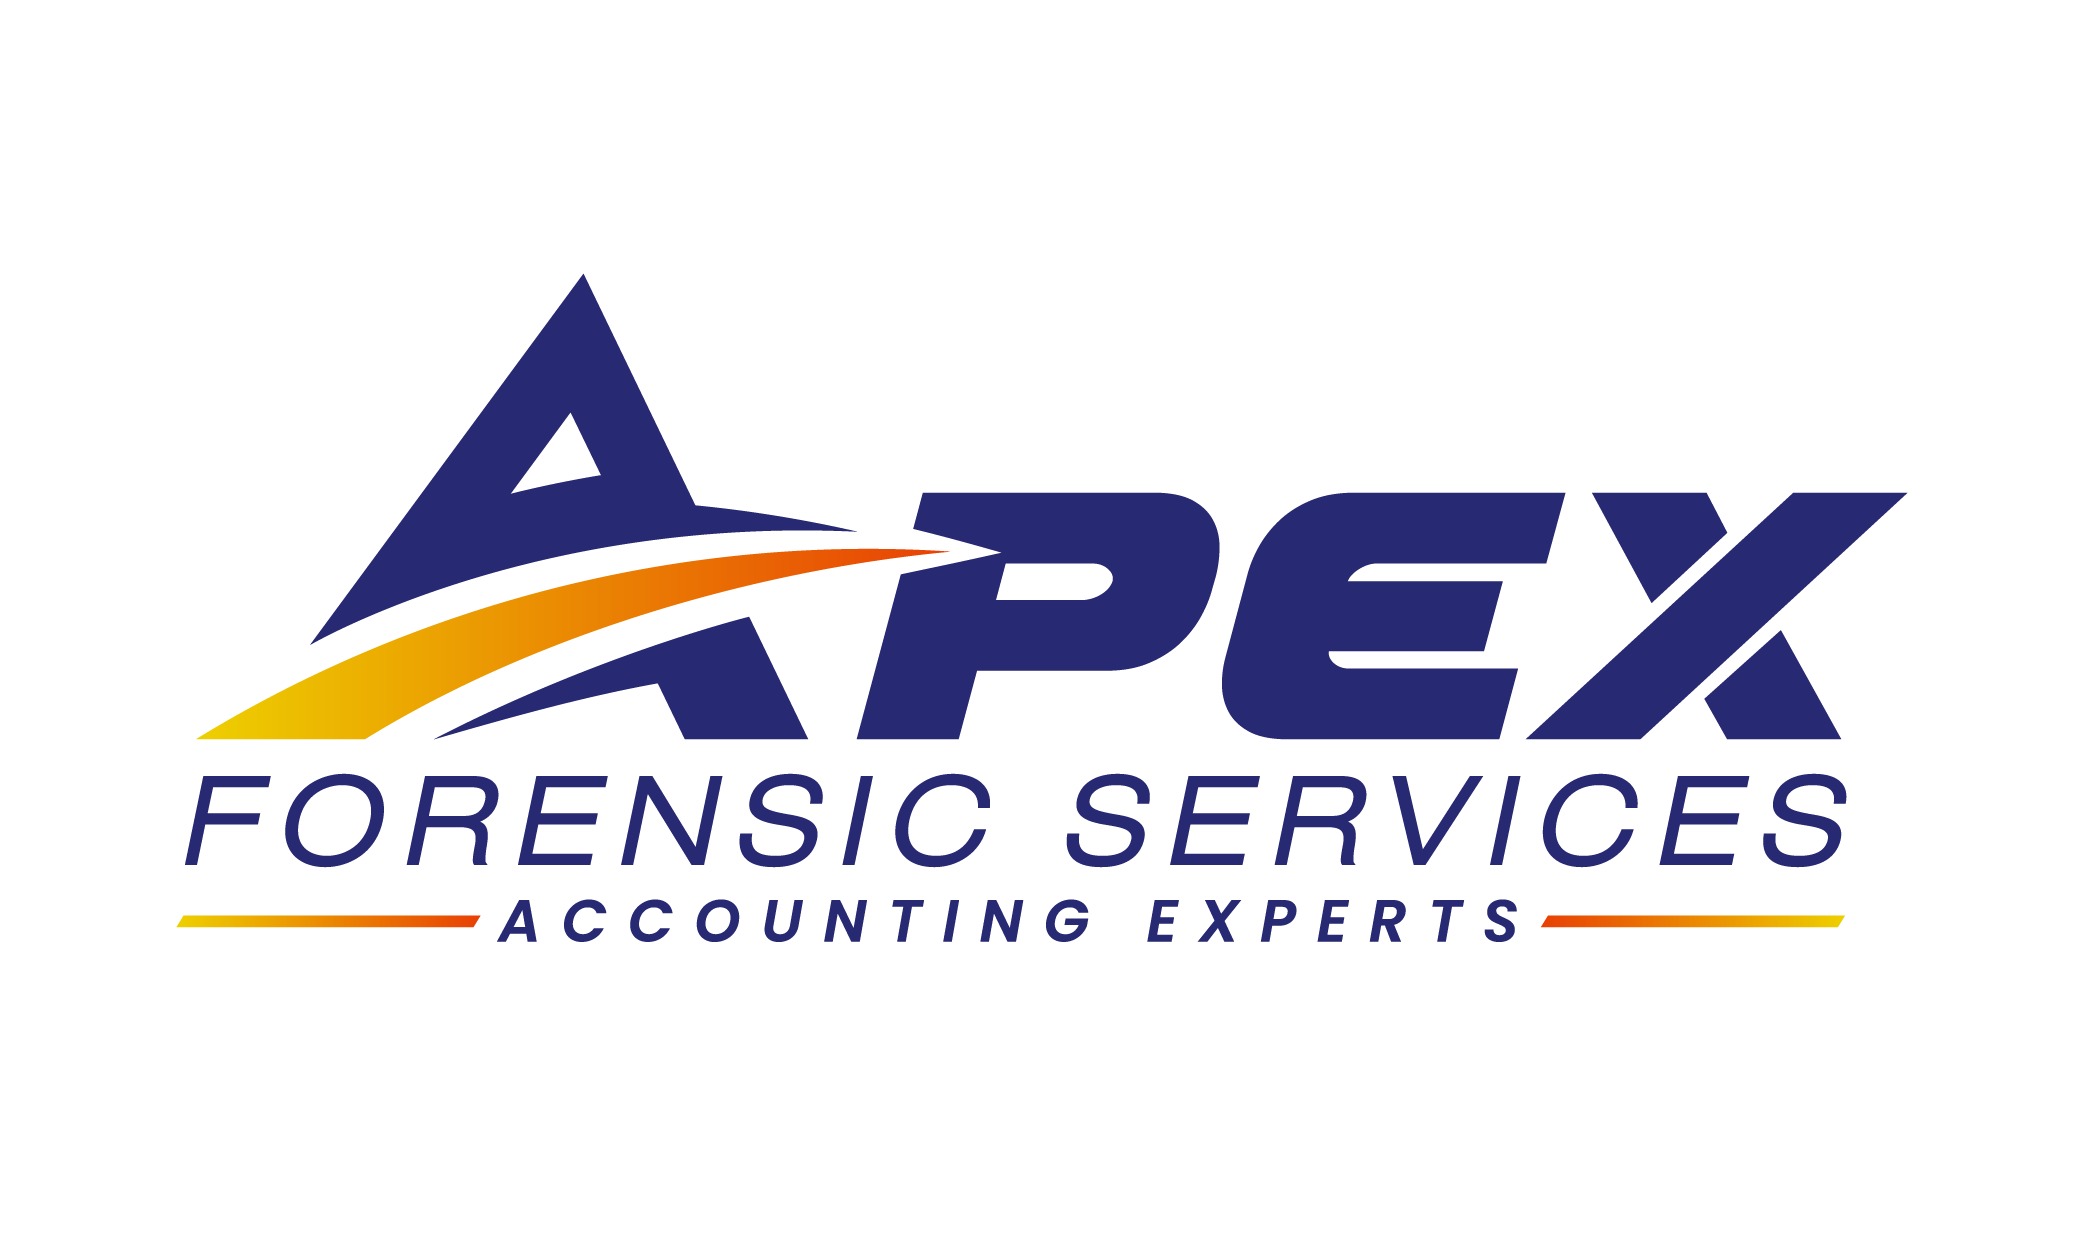 Expert Witness in Forensic Accounting | Litigation Support